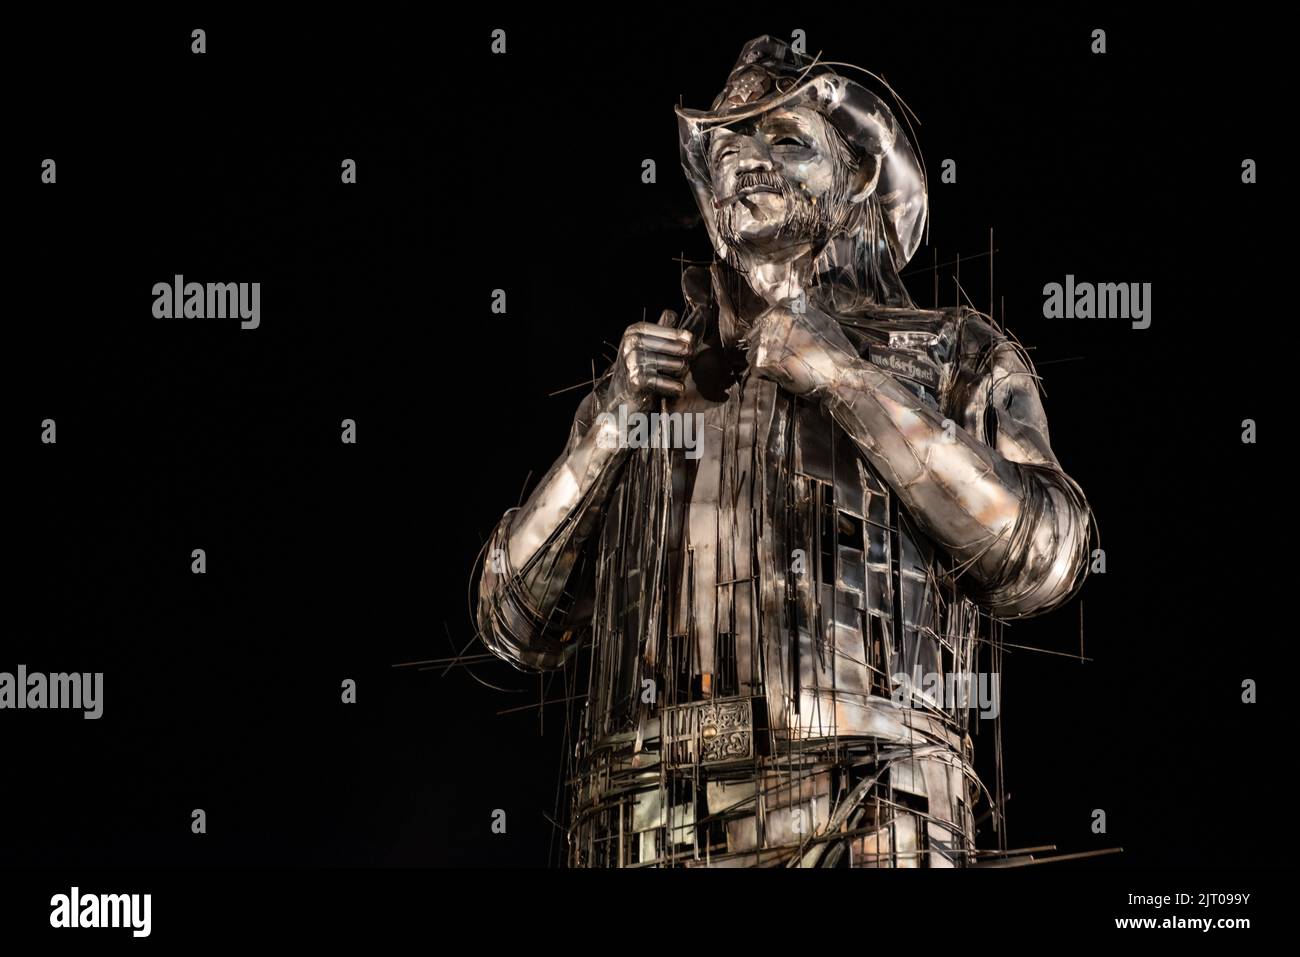 The statue in memory of Ian 'Lemmy' Kilmister of Motörhead unveiled in 2022 at the Hellfest Open Air festival Stock Photo